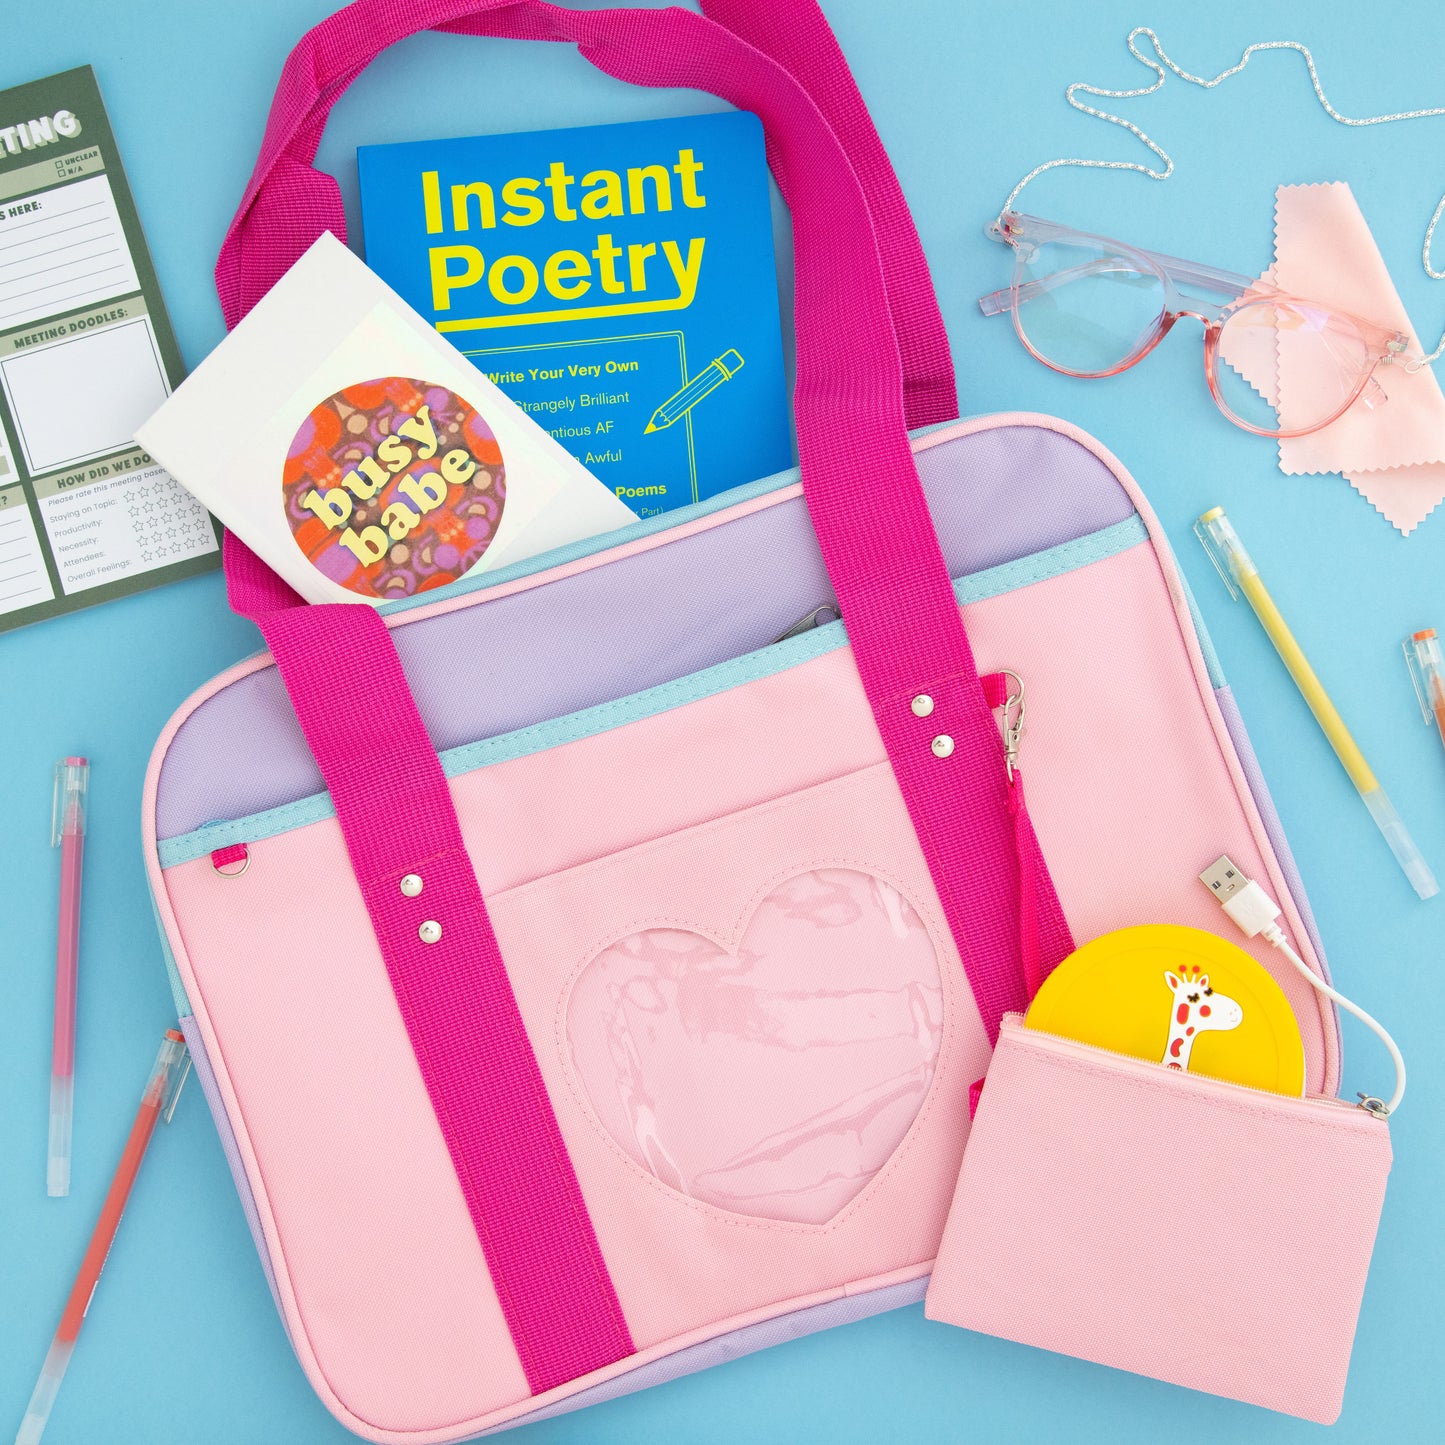 A collection of items from The Oddball Club includes an instant poetry book, pink glasses, a laptop bag with a clear heart and pink straps, busy babe notebook, and gel pens.